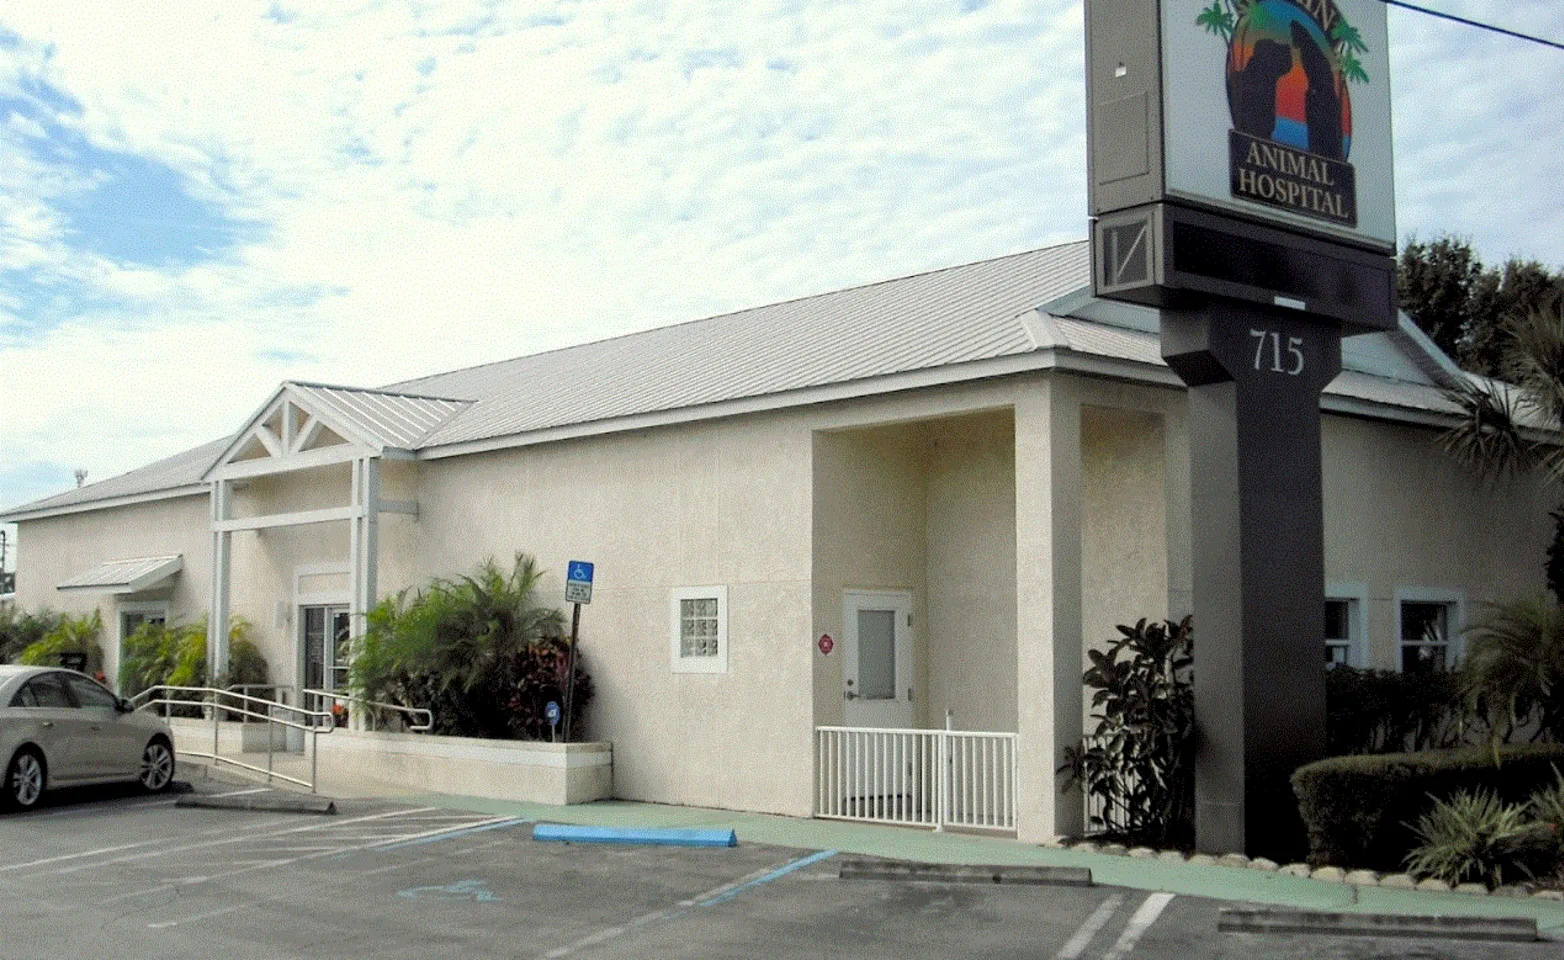 Ruskin Animal Hospital's front building